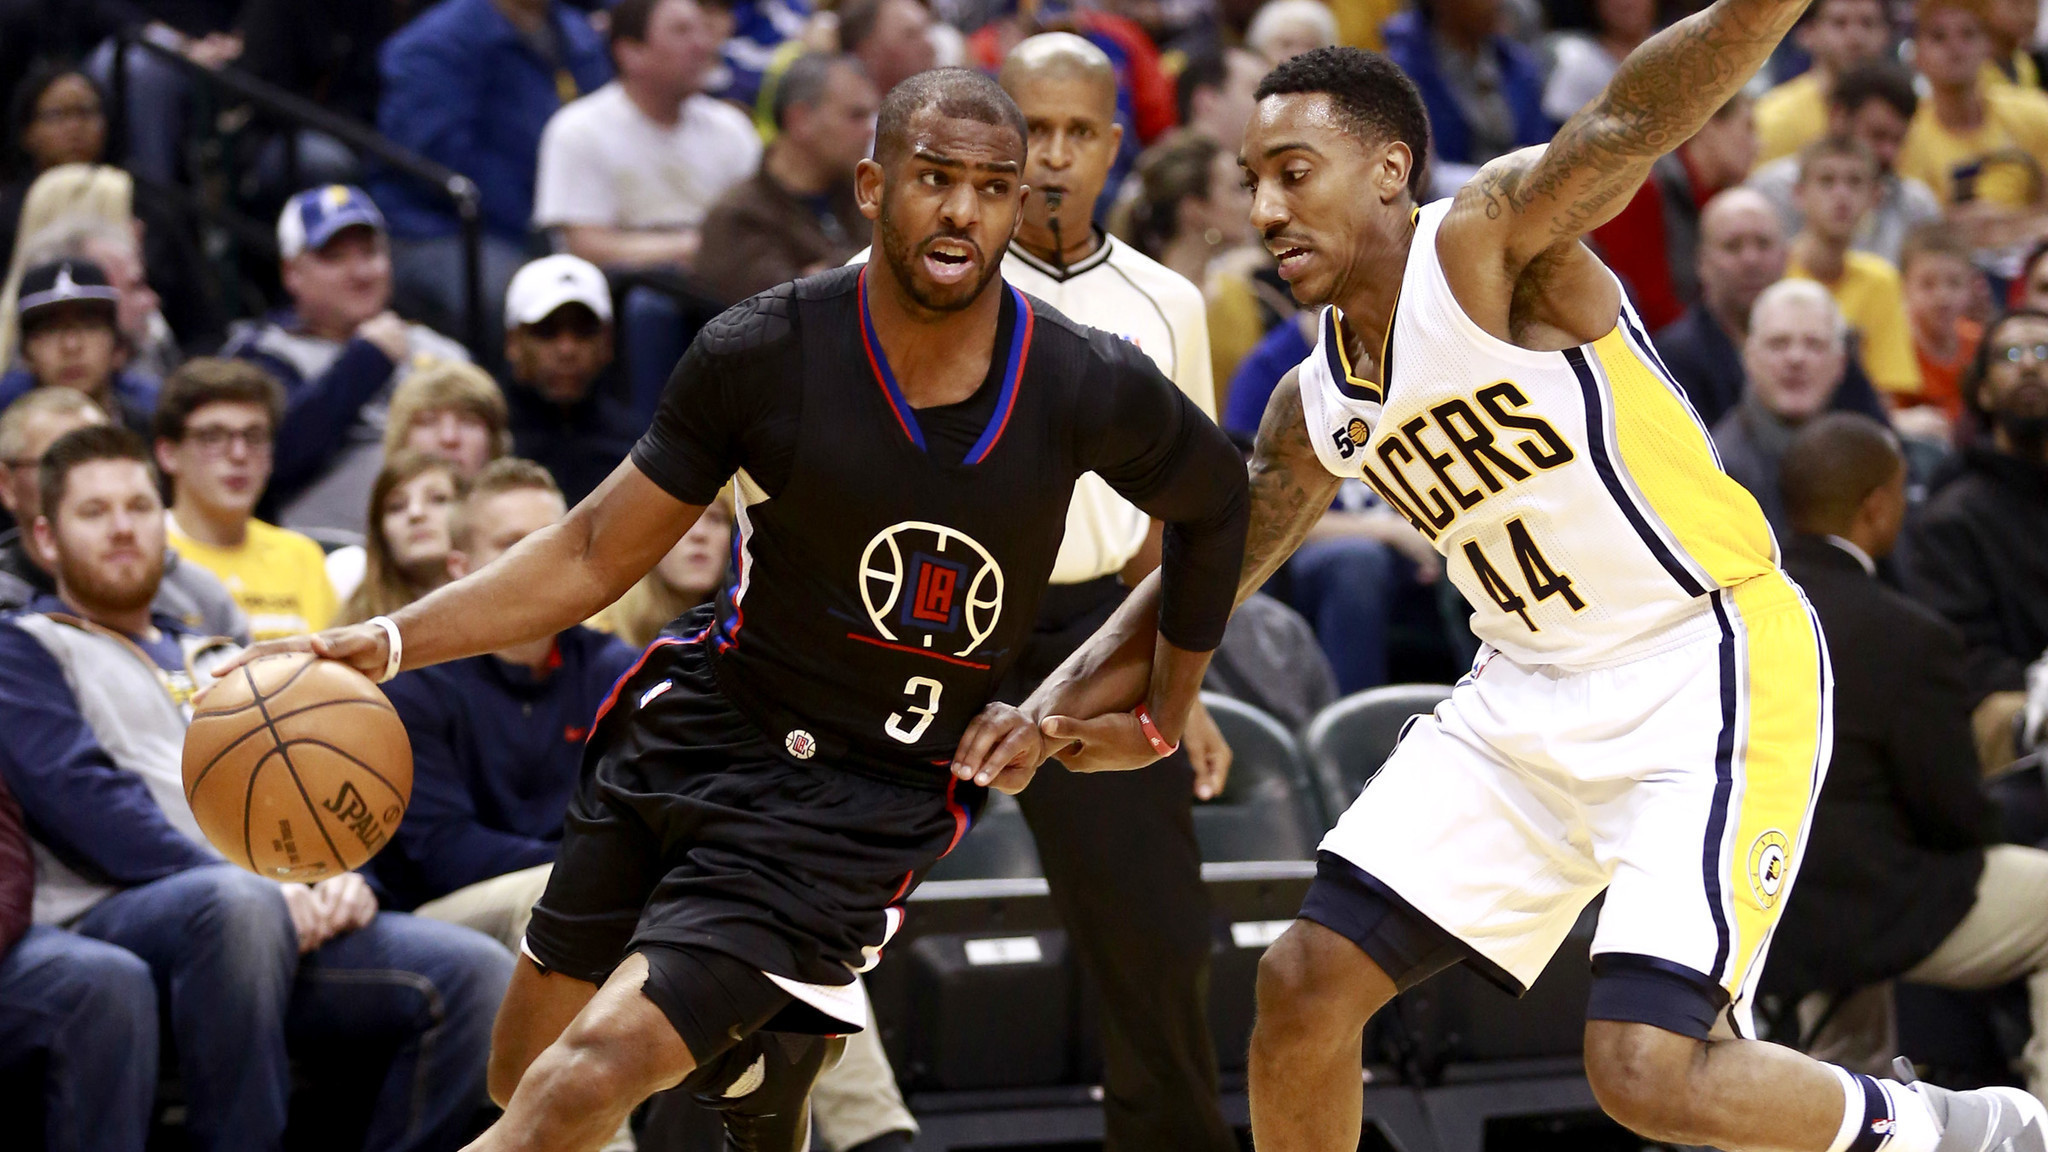 Clippers score season-low points in blowout loss to Pacers - The San Diego Union-Tribune